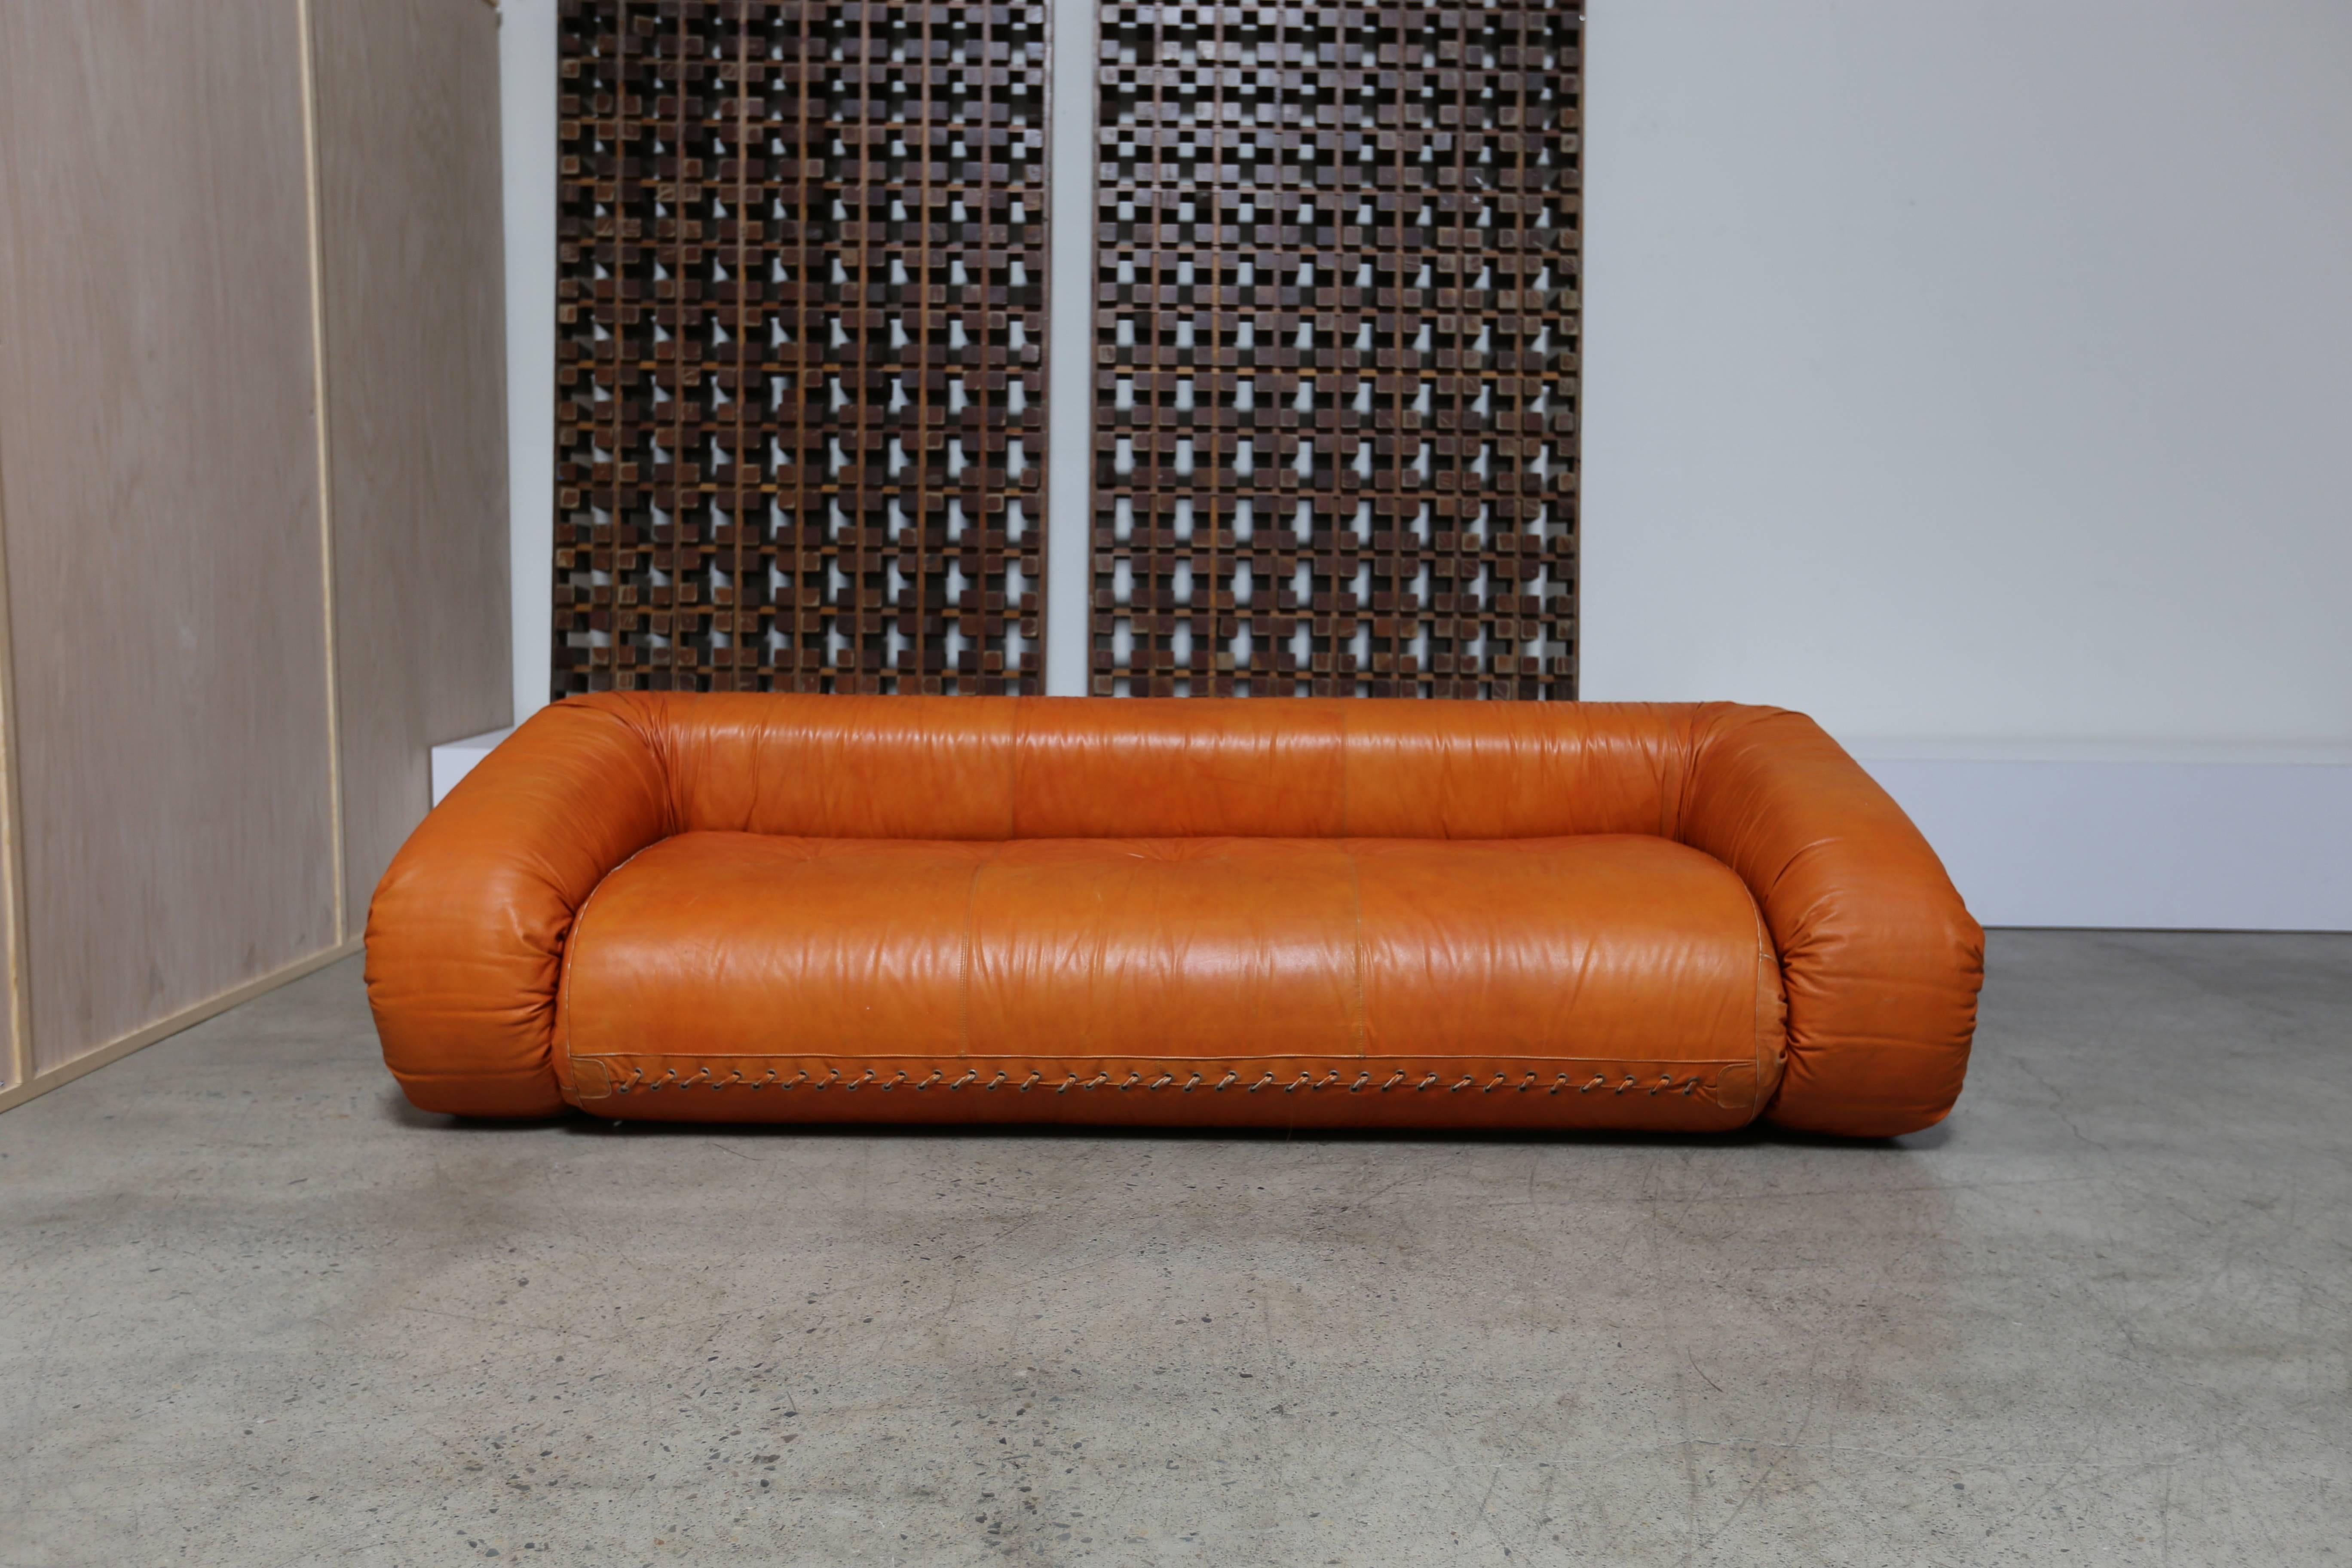 “Anfibio” sofa designed by Alessandro Becchi for Giovannetti. This piece converts into a bed.